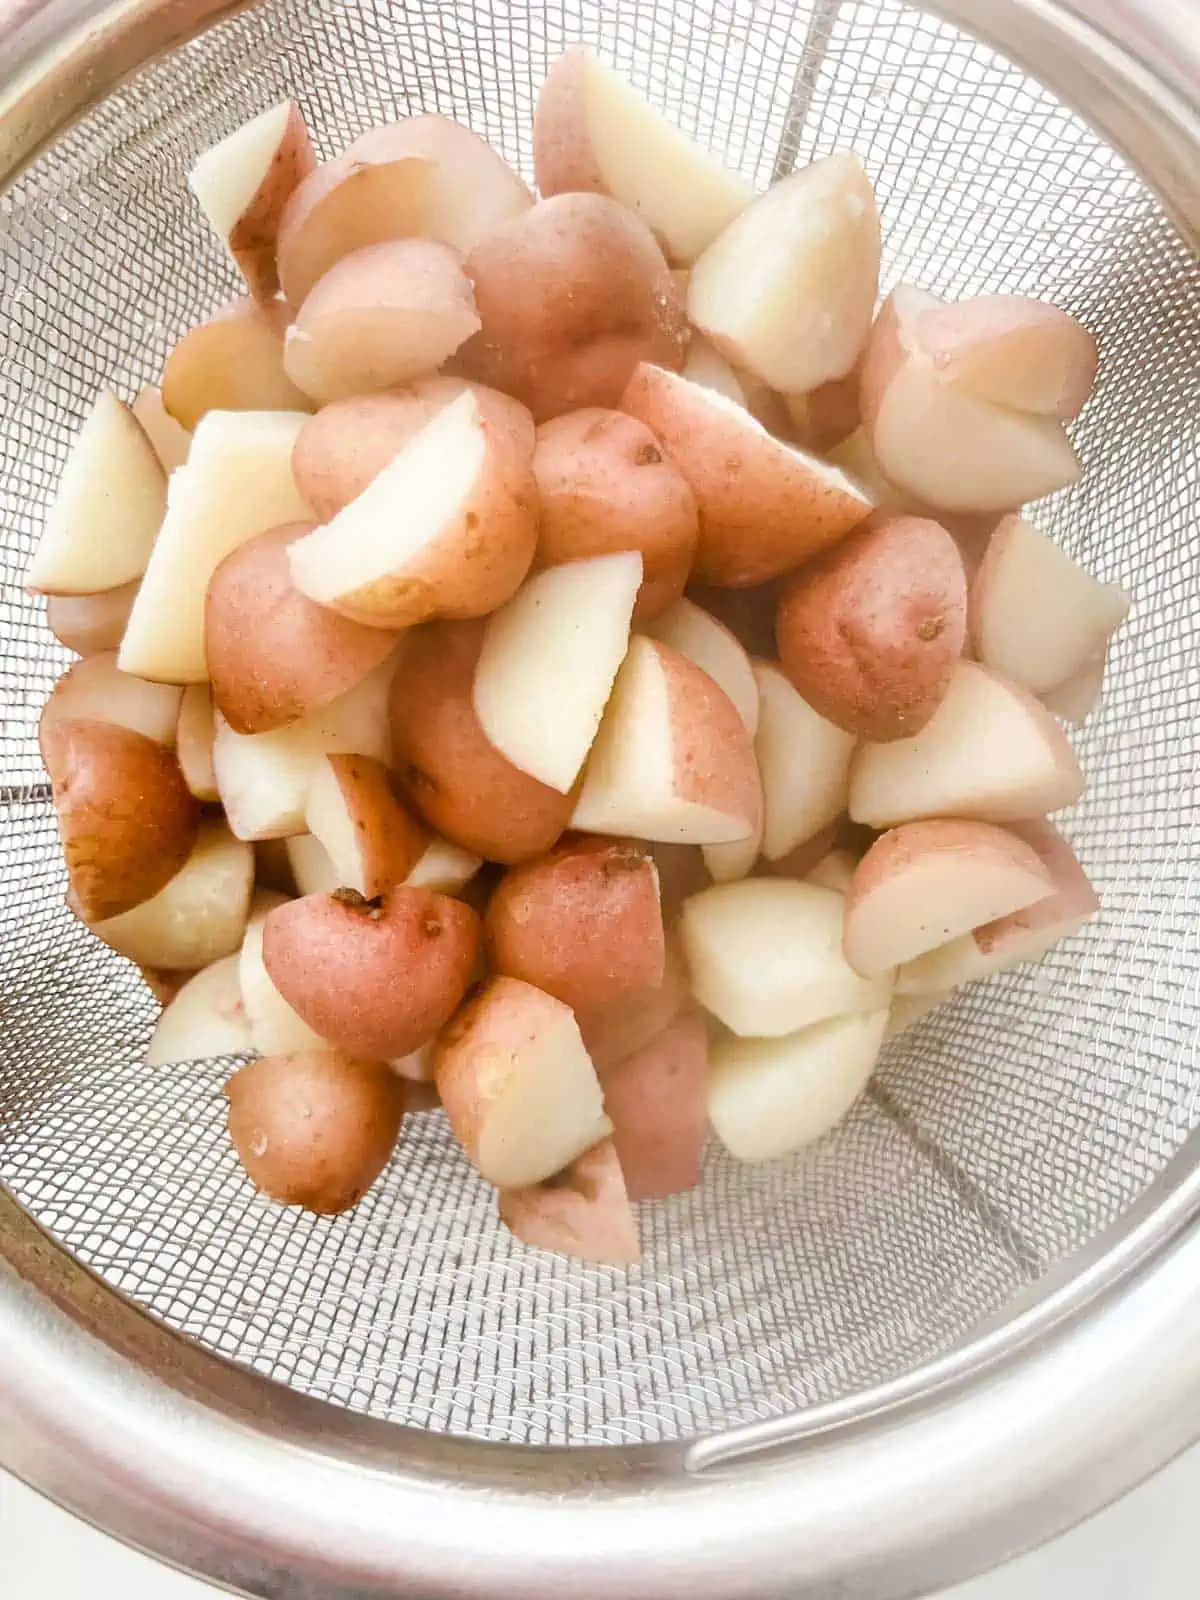 Photo of boiled potatoes in a strainer.